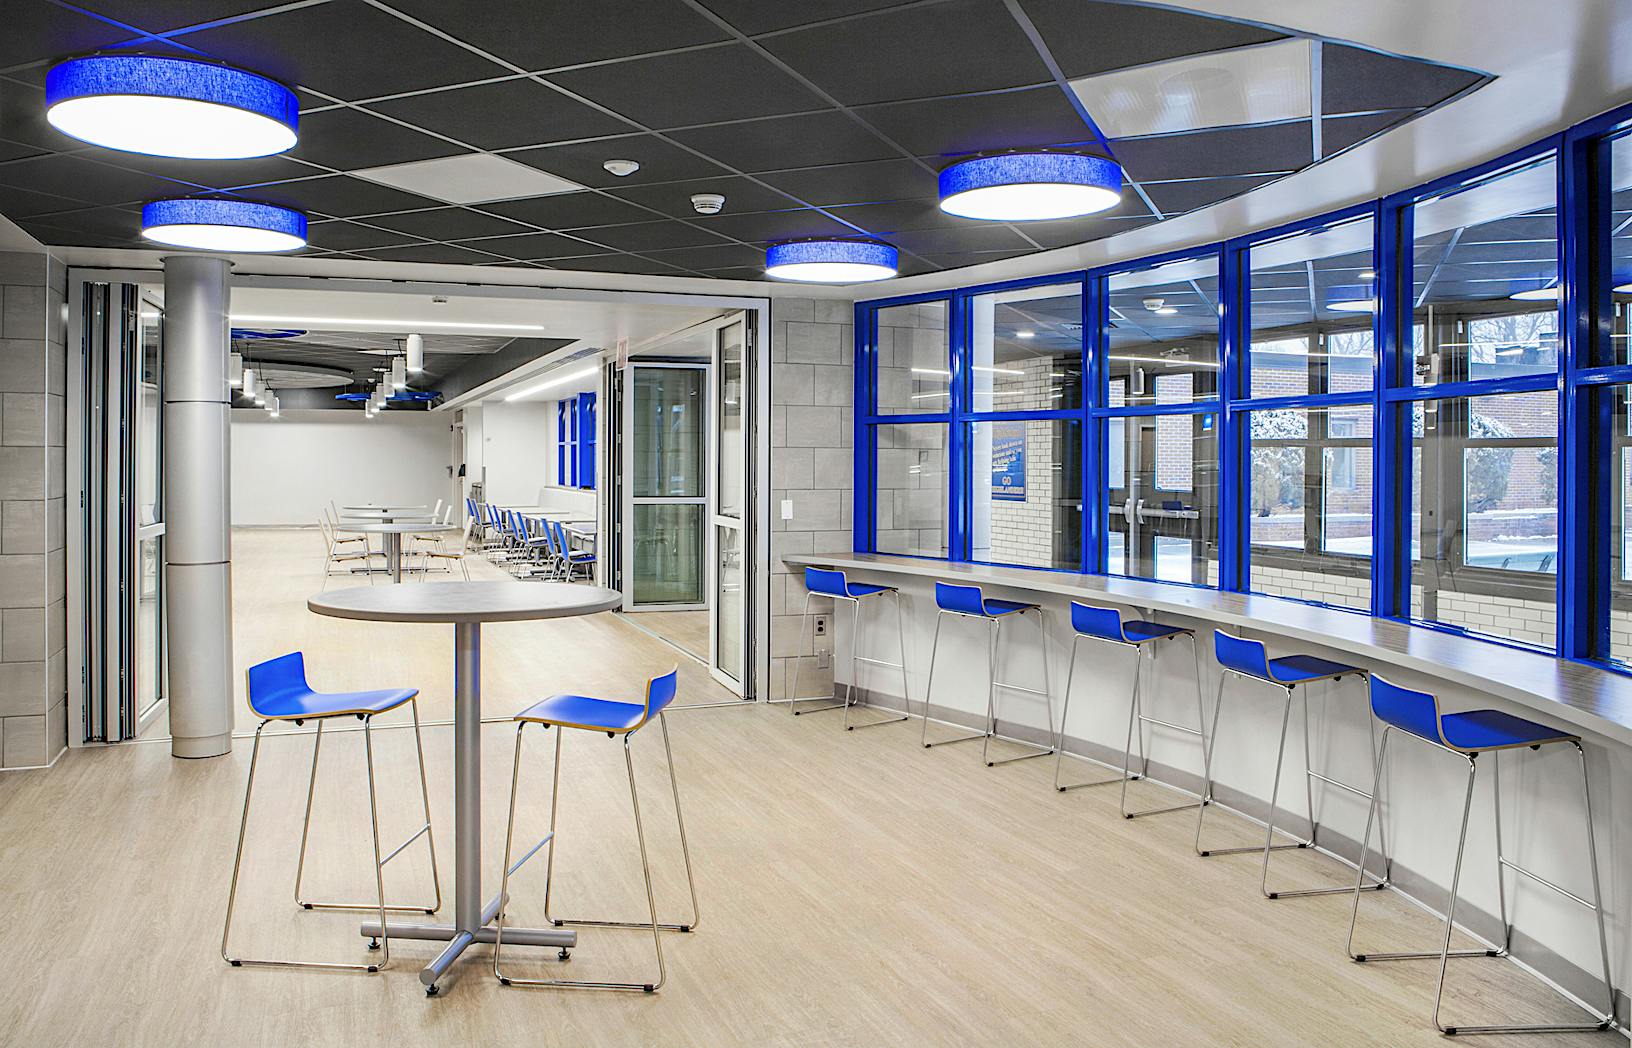 Modern room with high-top tables and chairs, a long counter with stools by large blue-framed windows